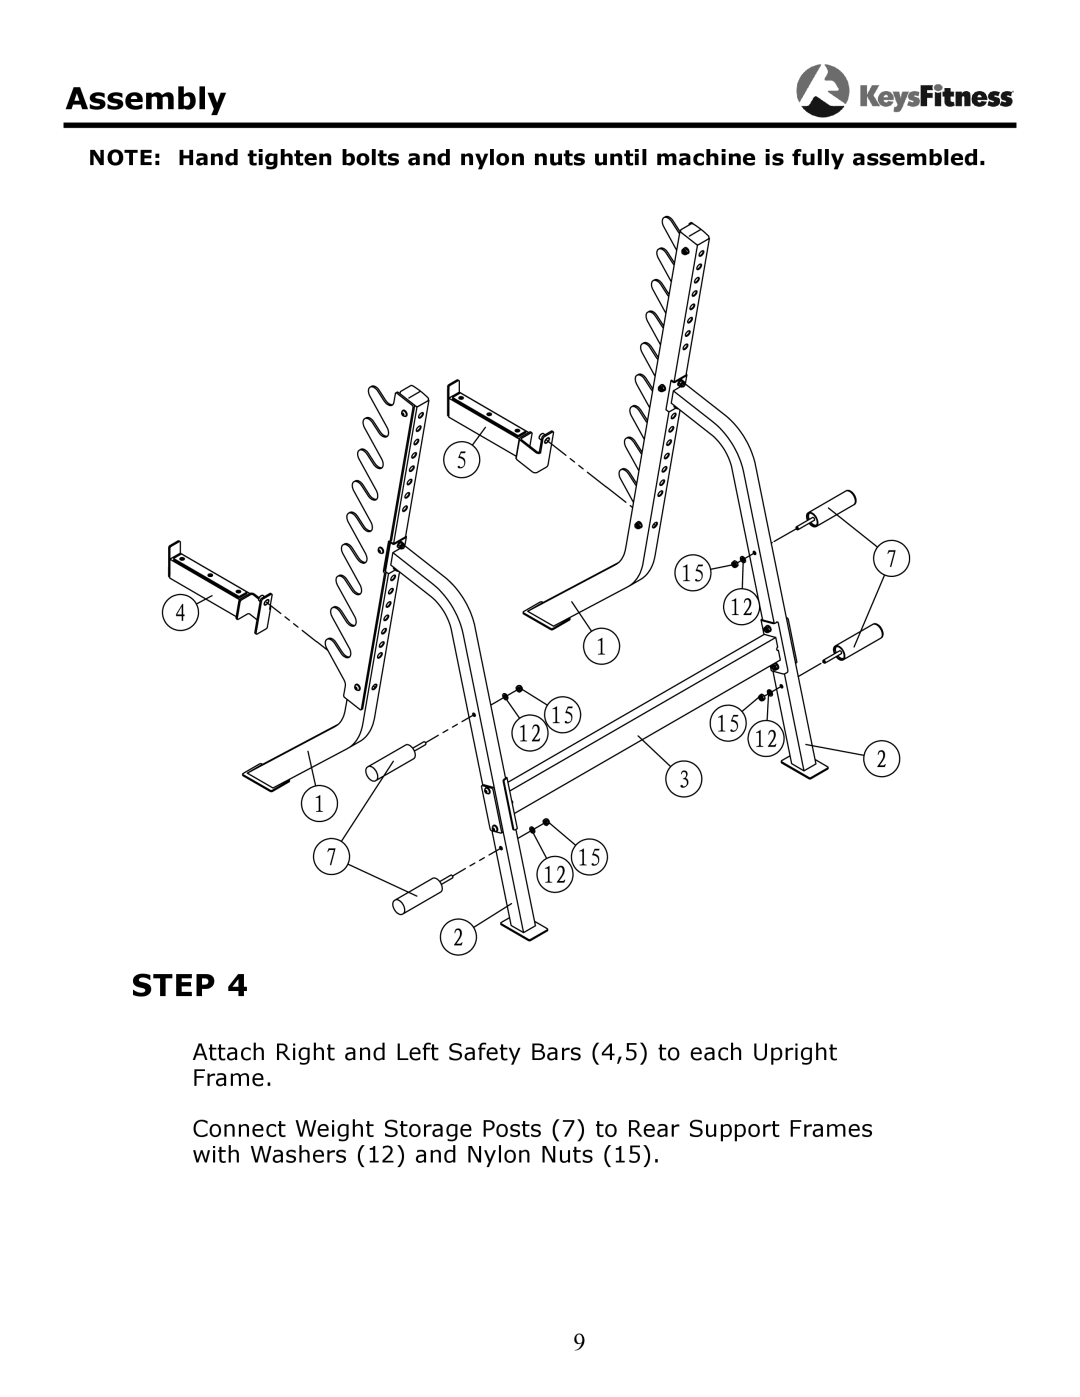 Keys Fitness KF-SS owner manual Assembly, Step, Attach Right and Left Safety Bars 4,5 to each Upright Frame 